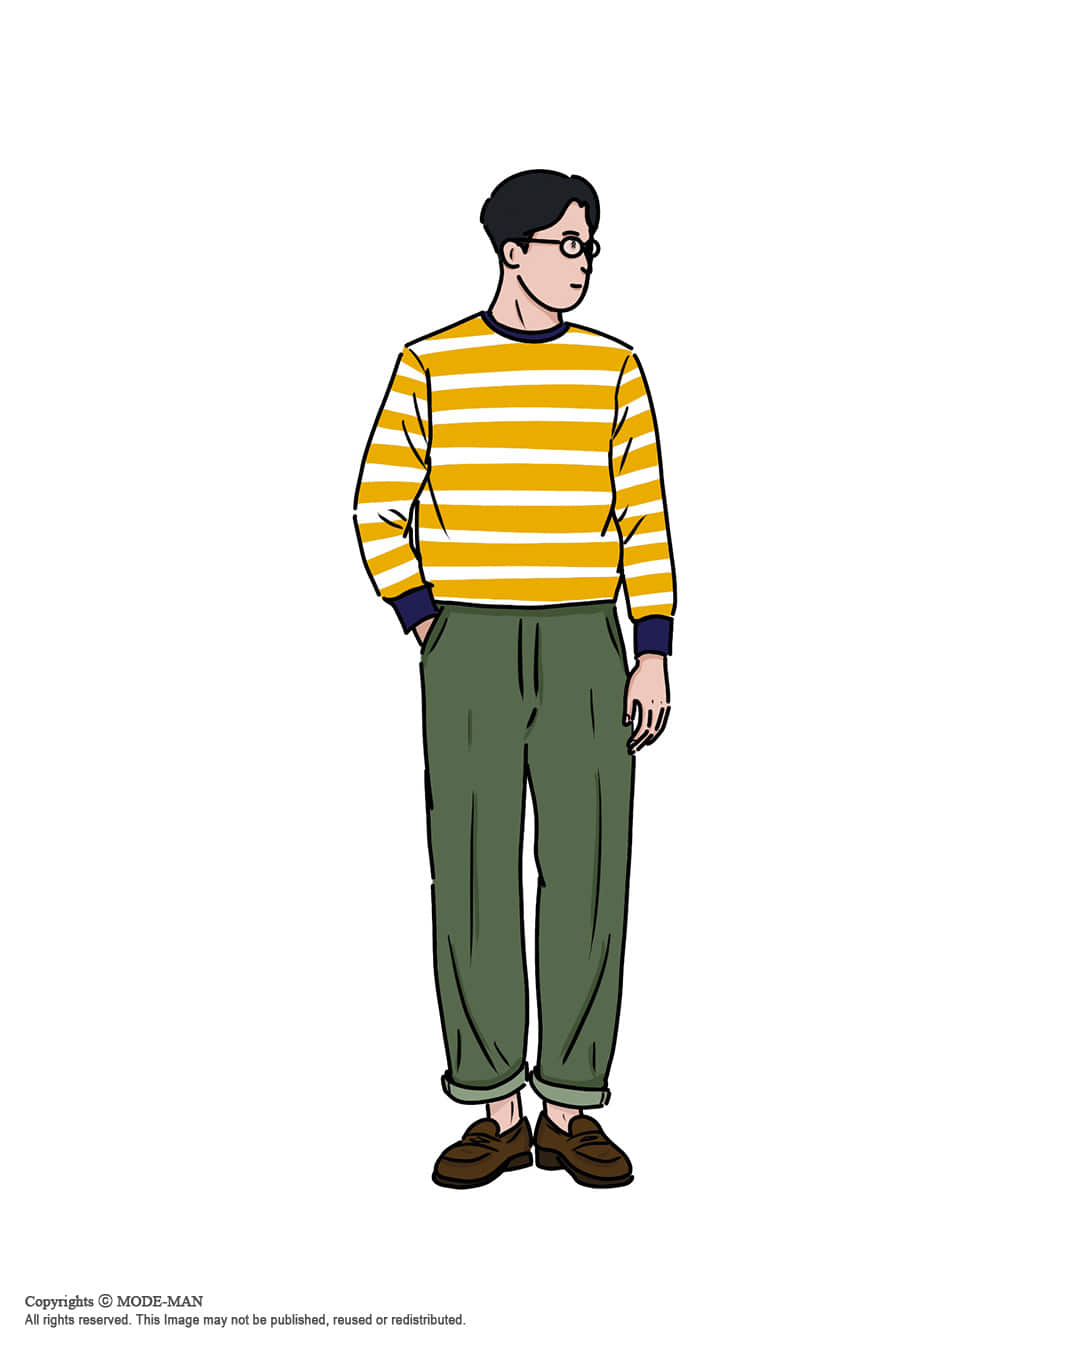 [STYLING] STRIPED CREW NECK TEE ILLUSTRATION STYLING